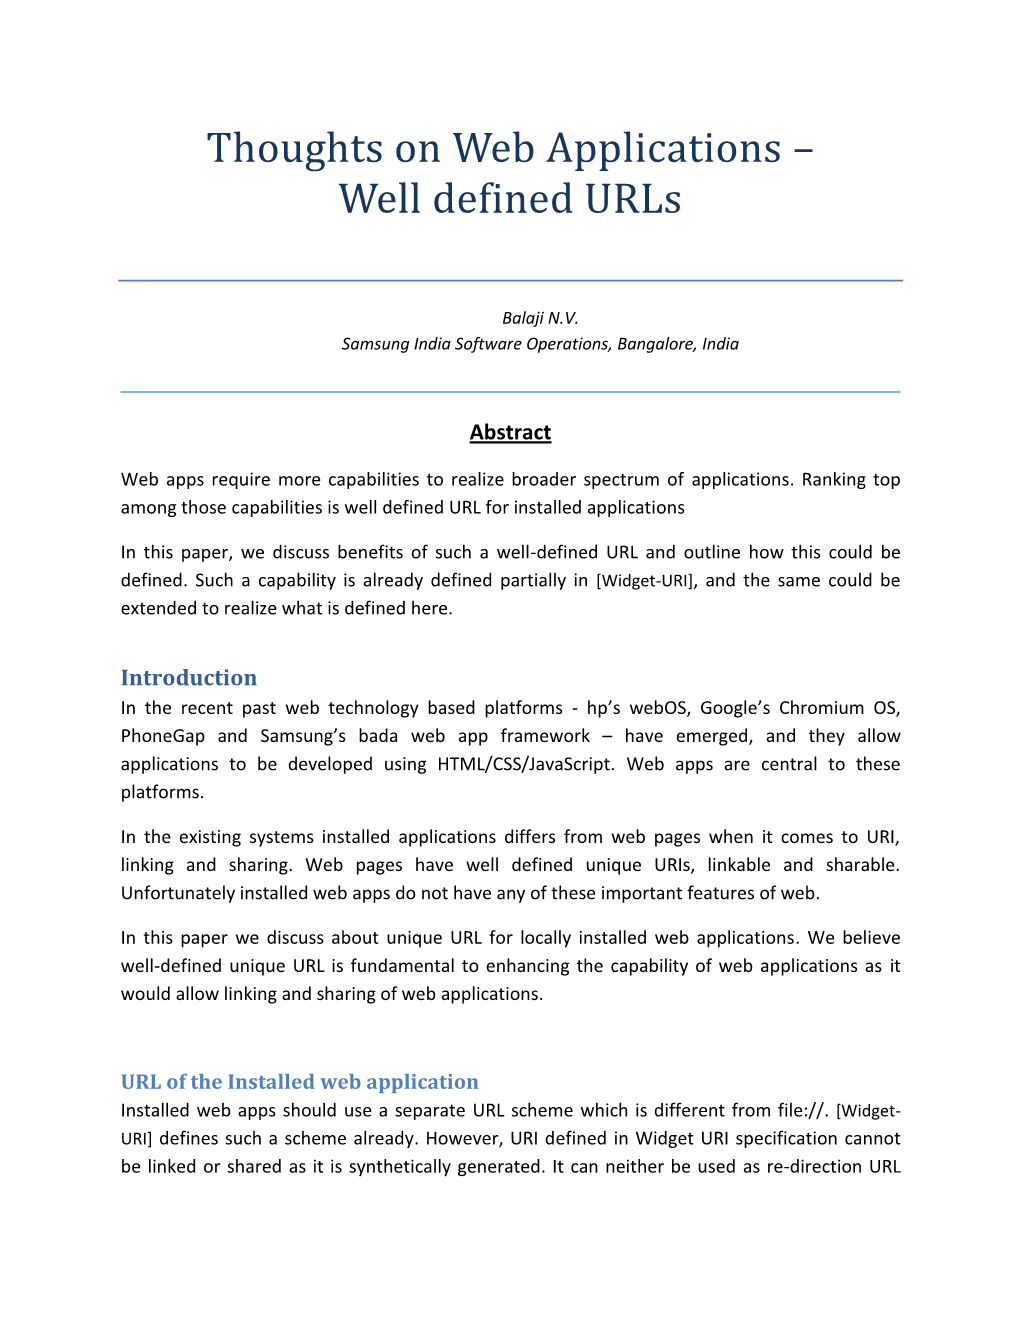 Thoughts on Web Applications – Well Defined Urls